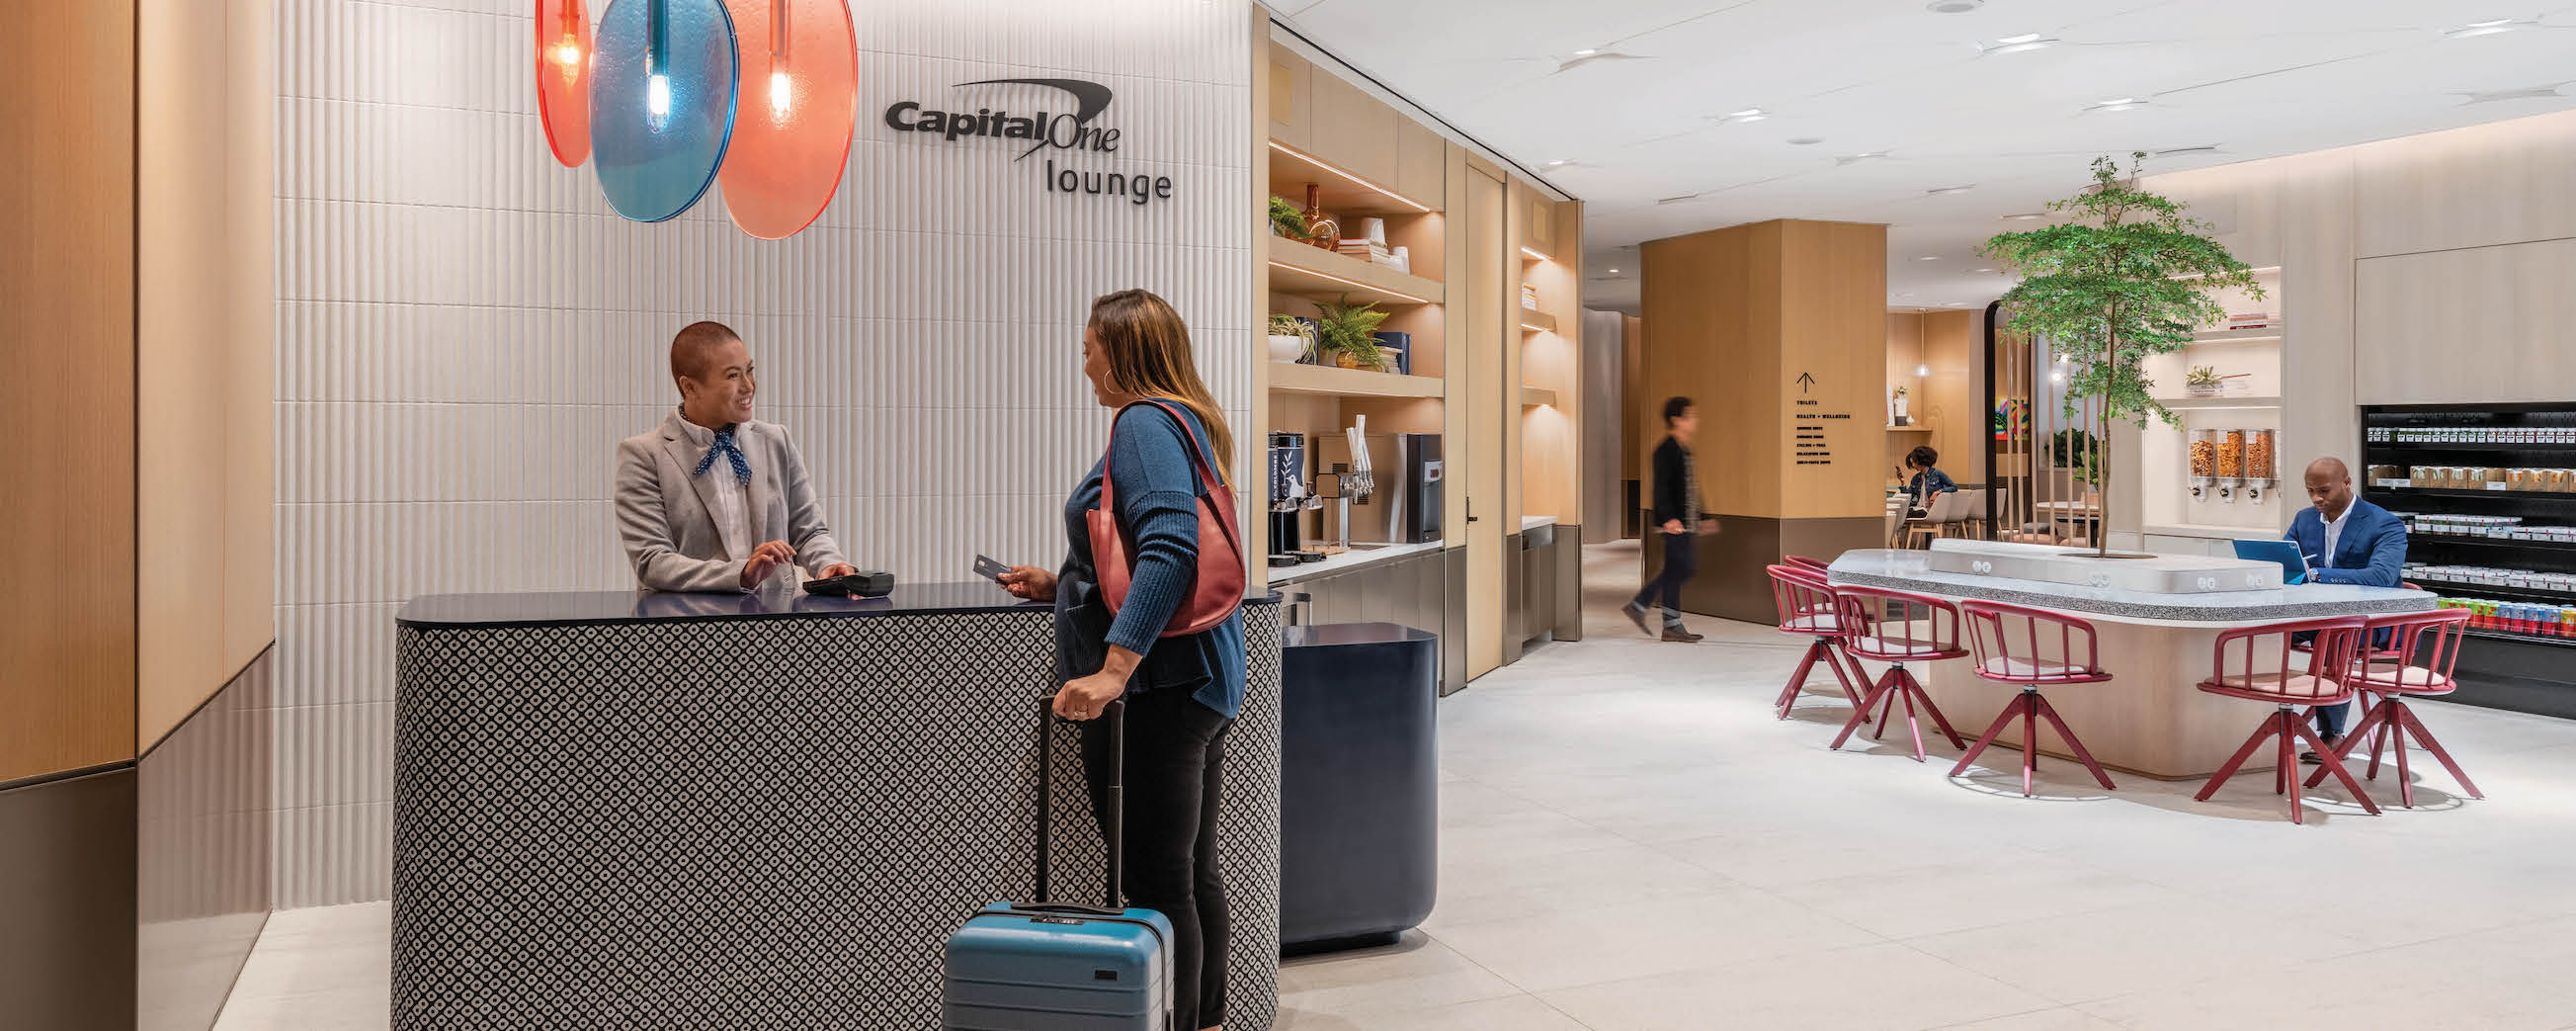 Woman with blue vest and suitcase is greeted by Capital One Associate at the Capital One airport lounge